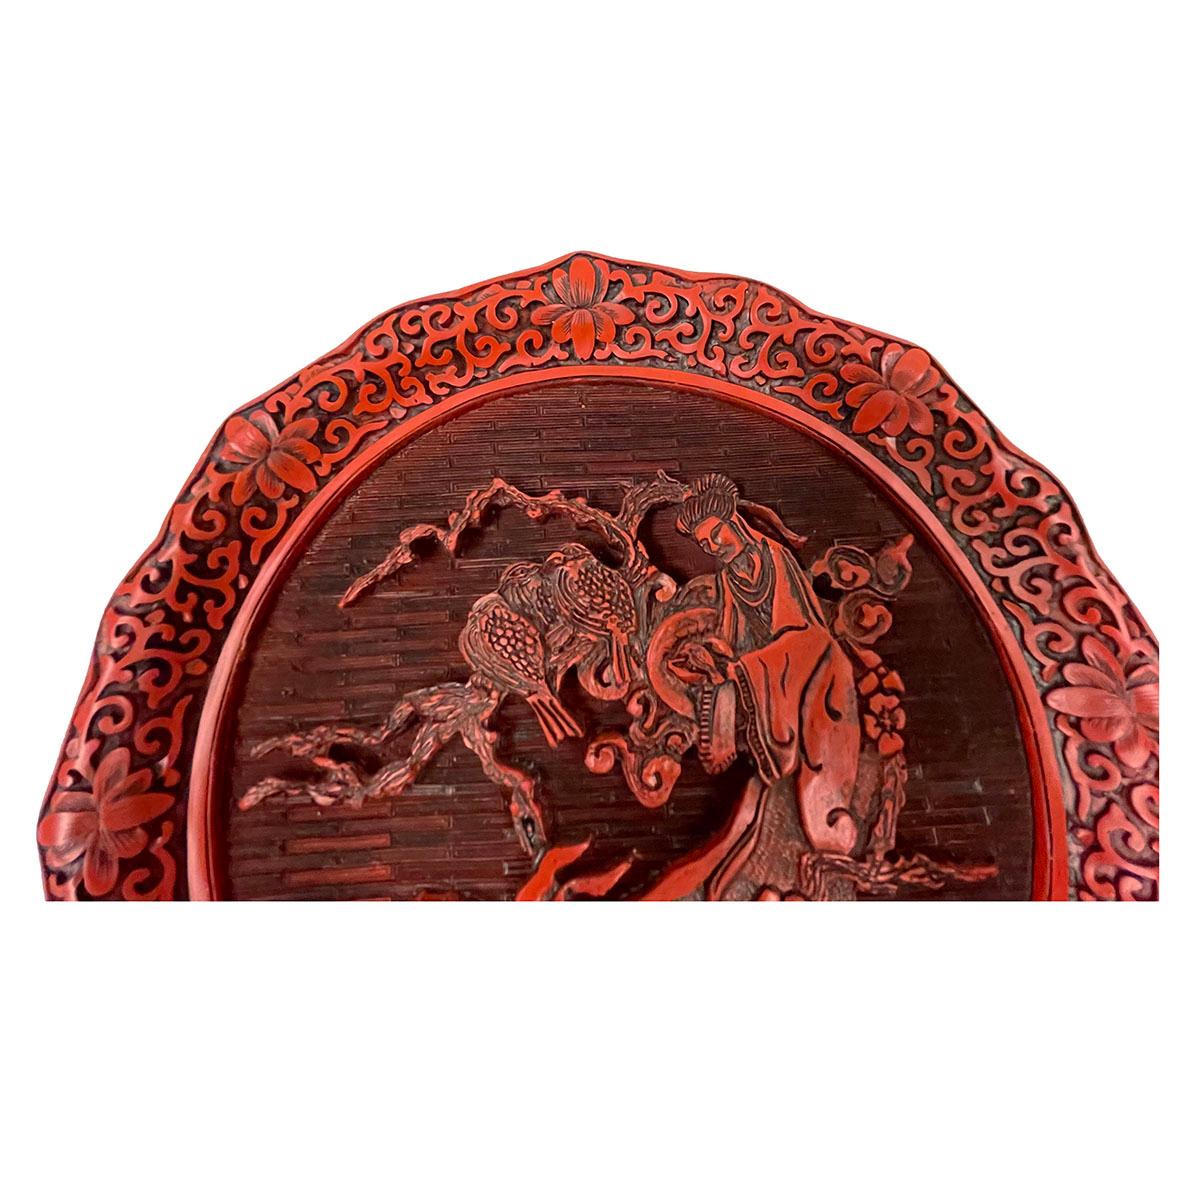 This stunning Chinese hand carved cinnabar lacquered plate is a limited edition to 19,500 pieces total. This plate is numbered 3969. It named The Sense of Tough, an original works of art in the tradition of Chu Yuan-Chang, from the Ming Dynasty.